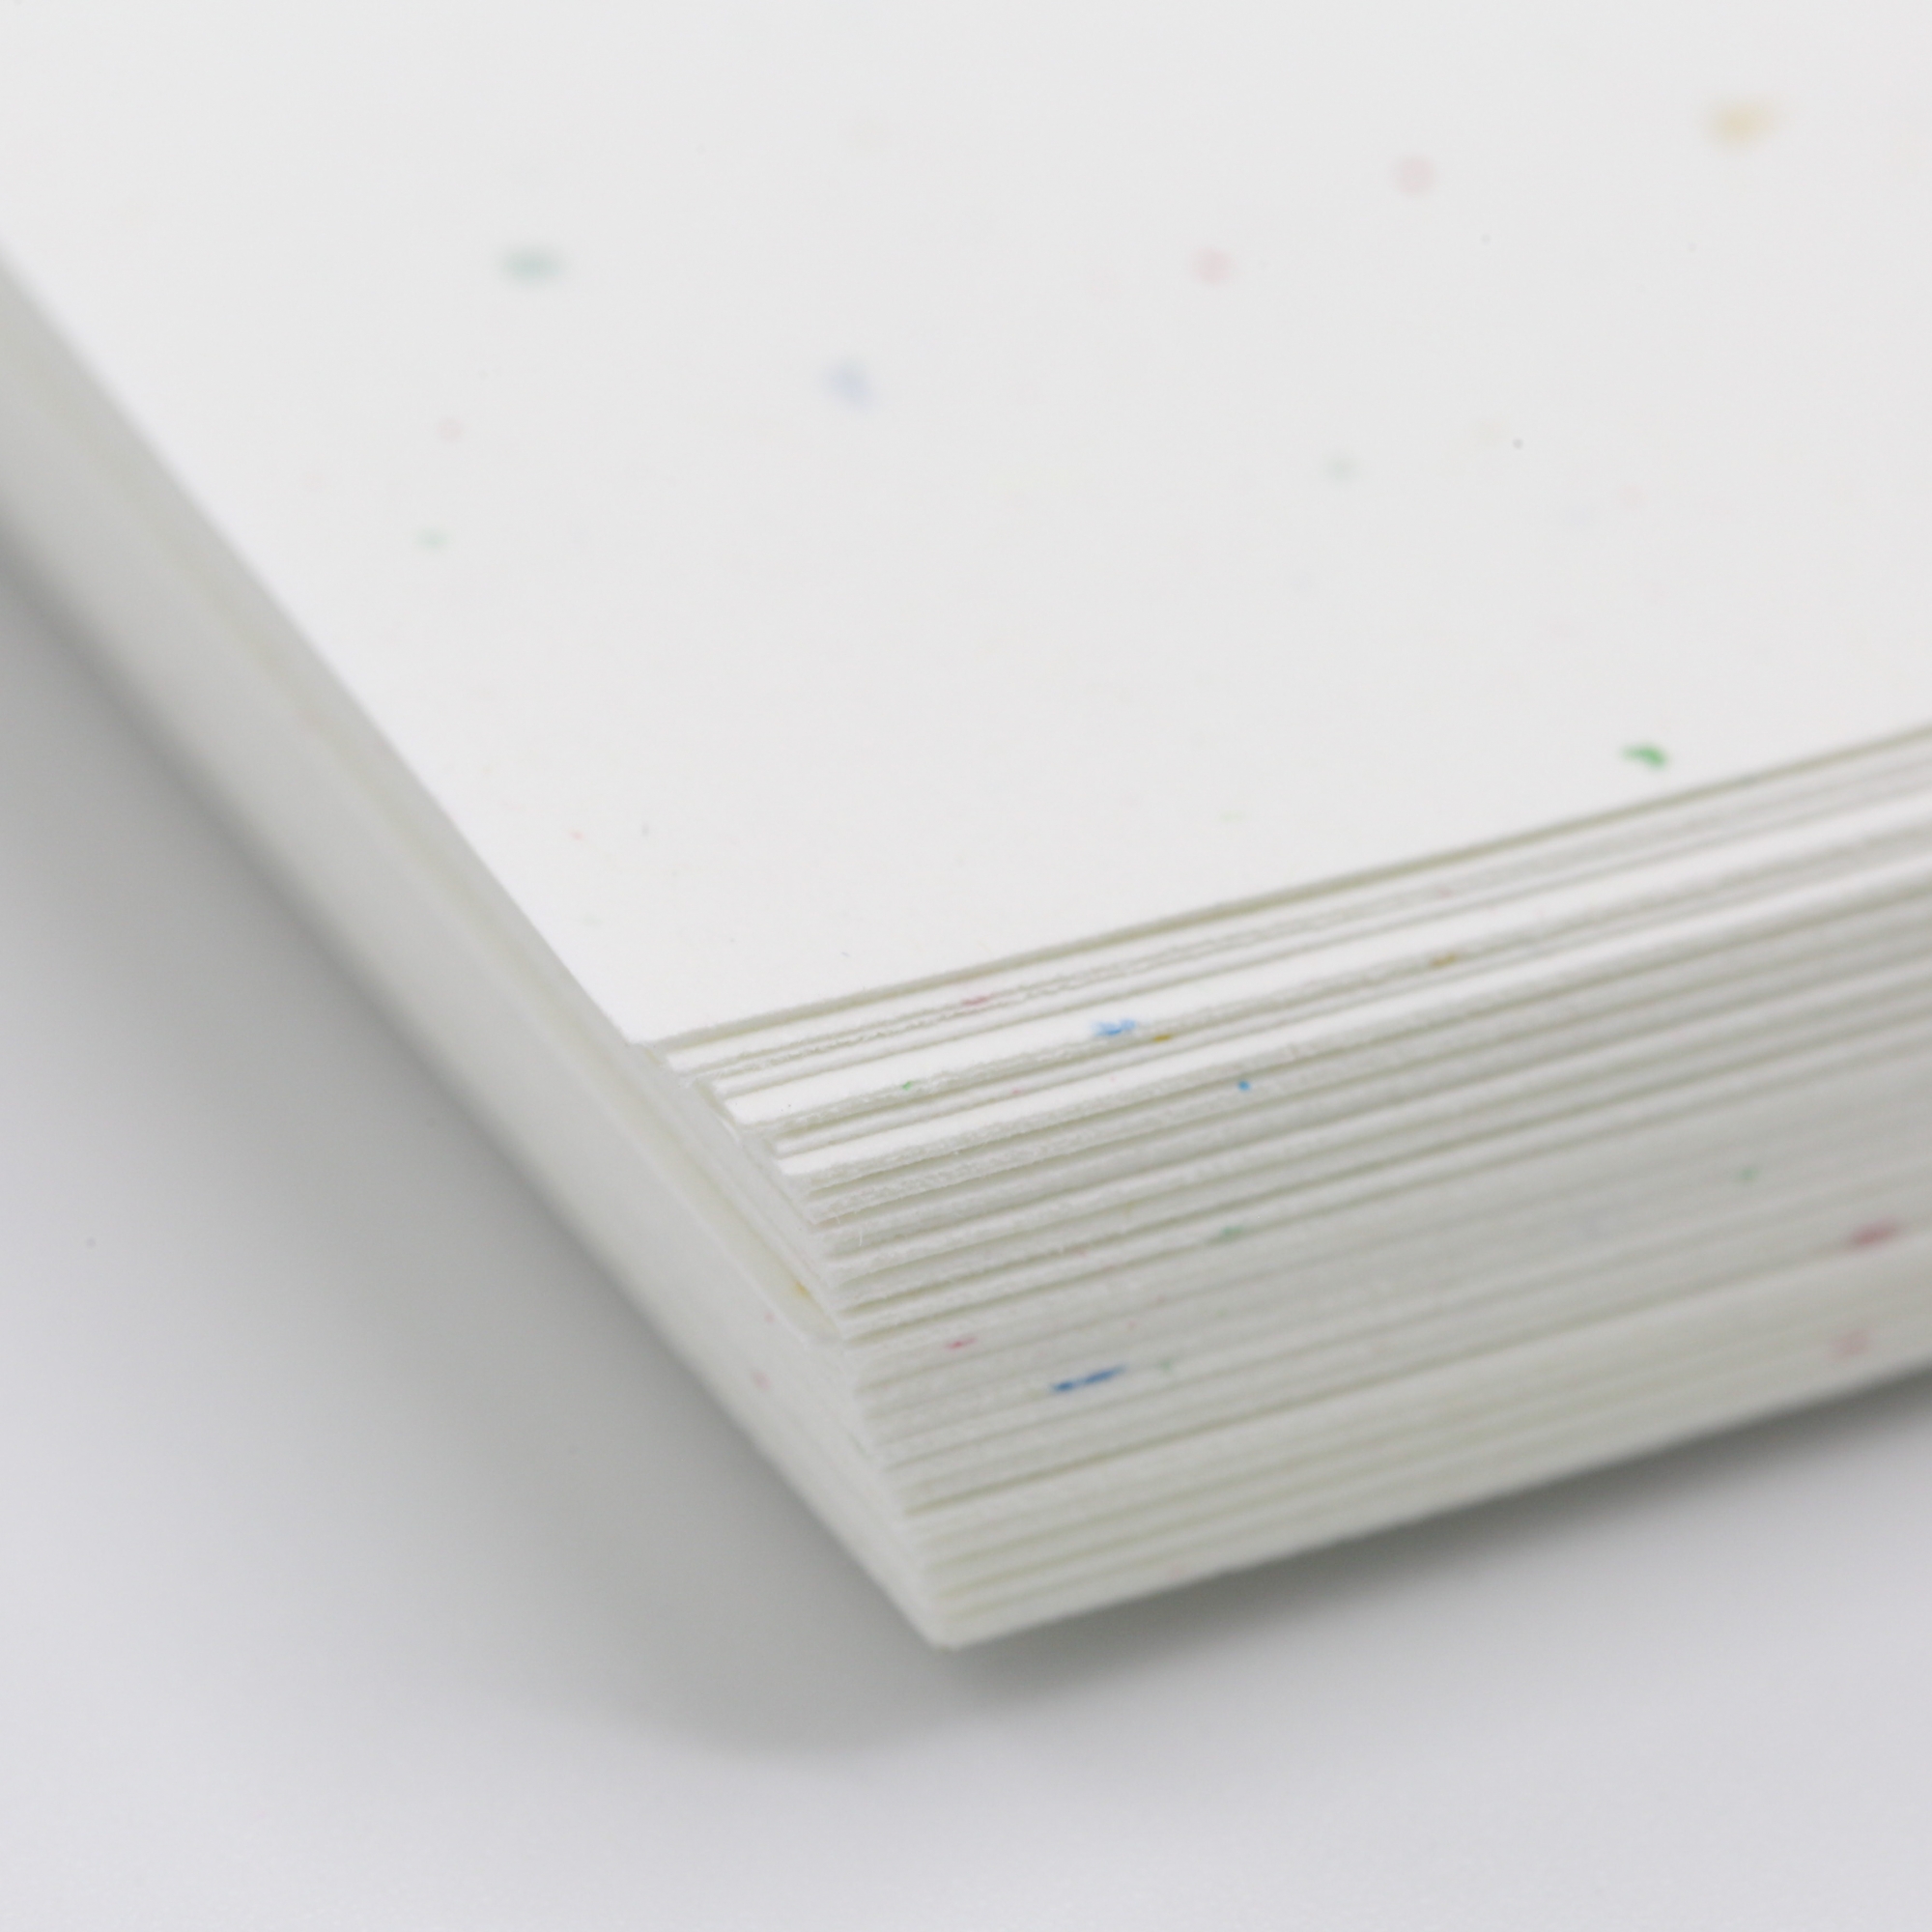 Astrobrights/Neenah Bright White Cardstock, 8.5 x 11, 65 75